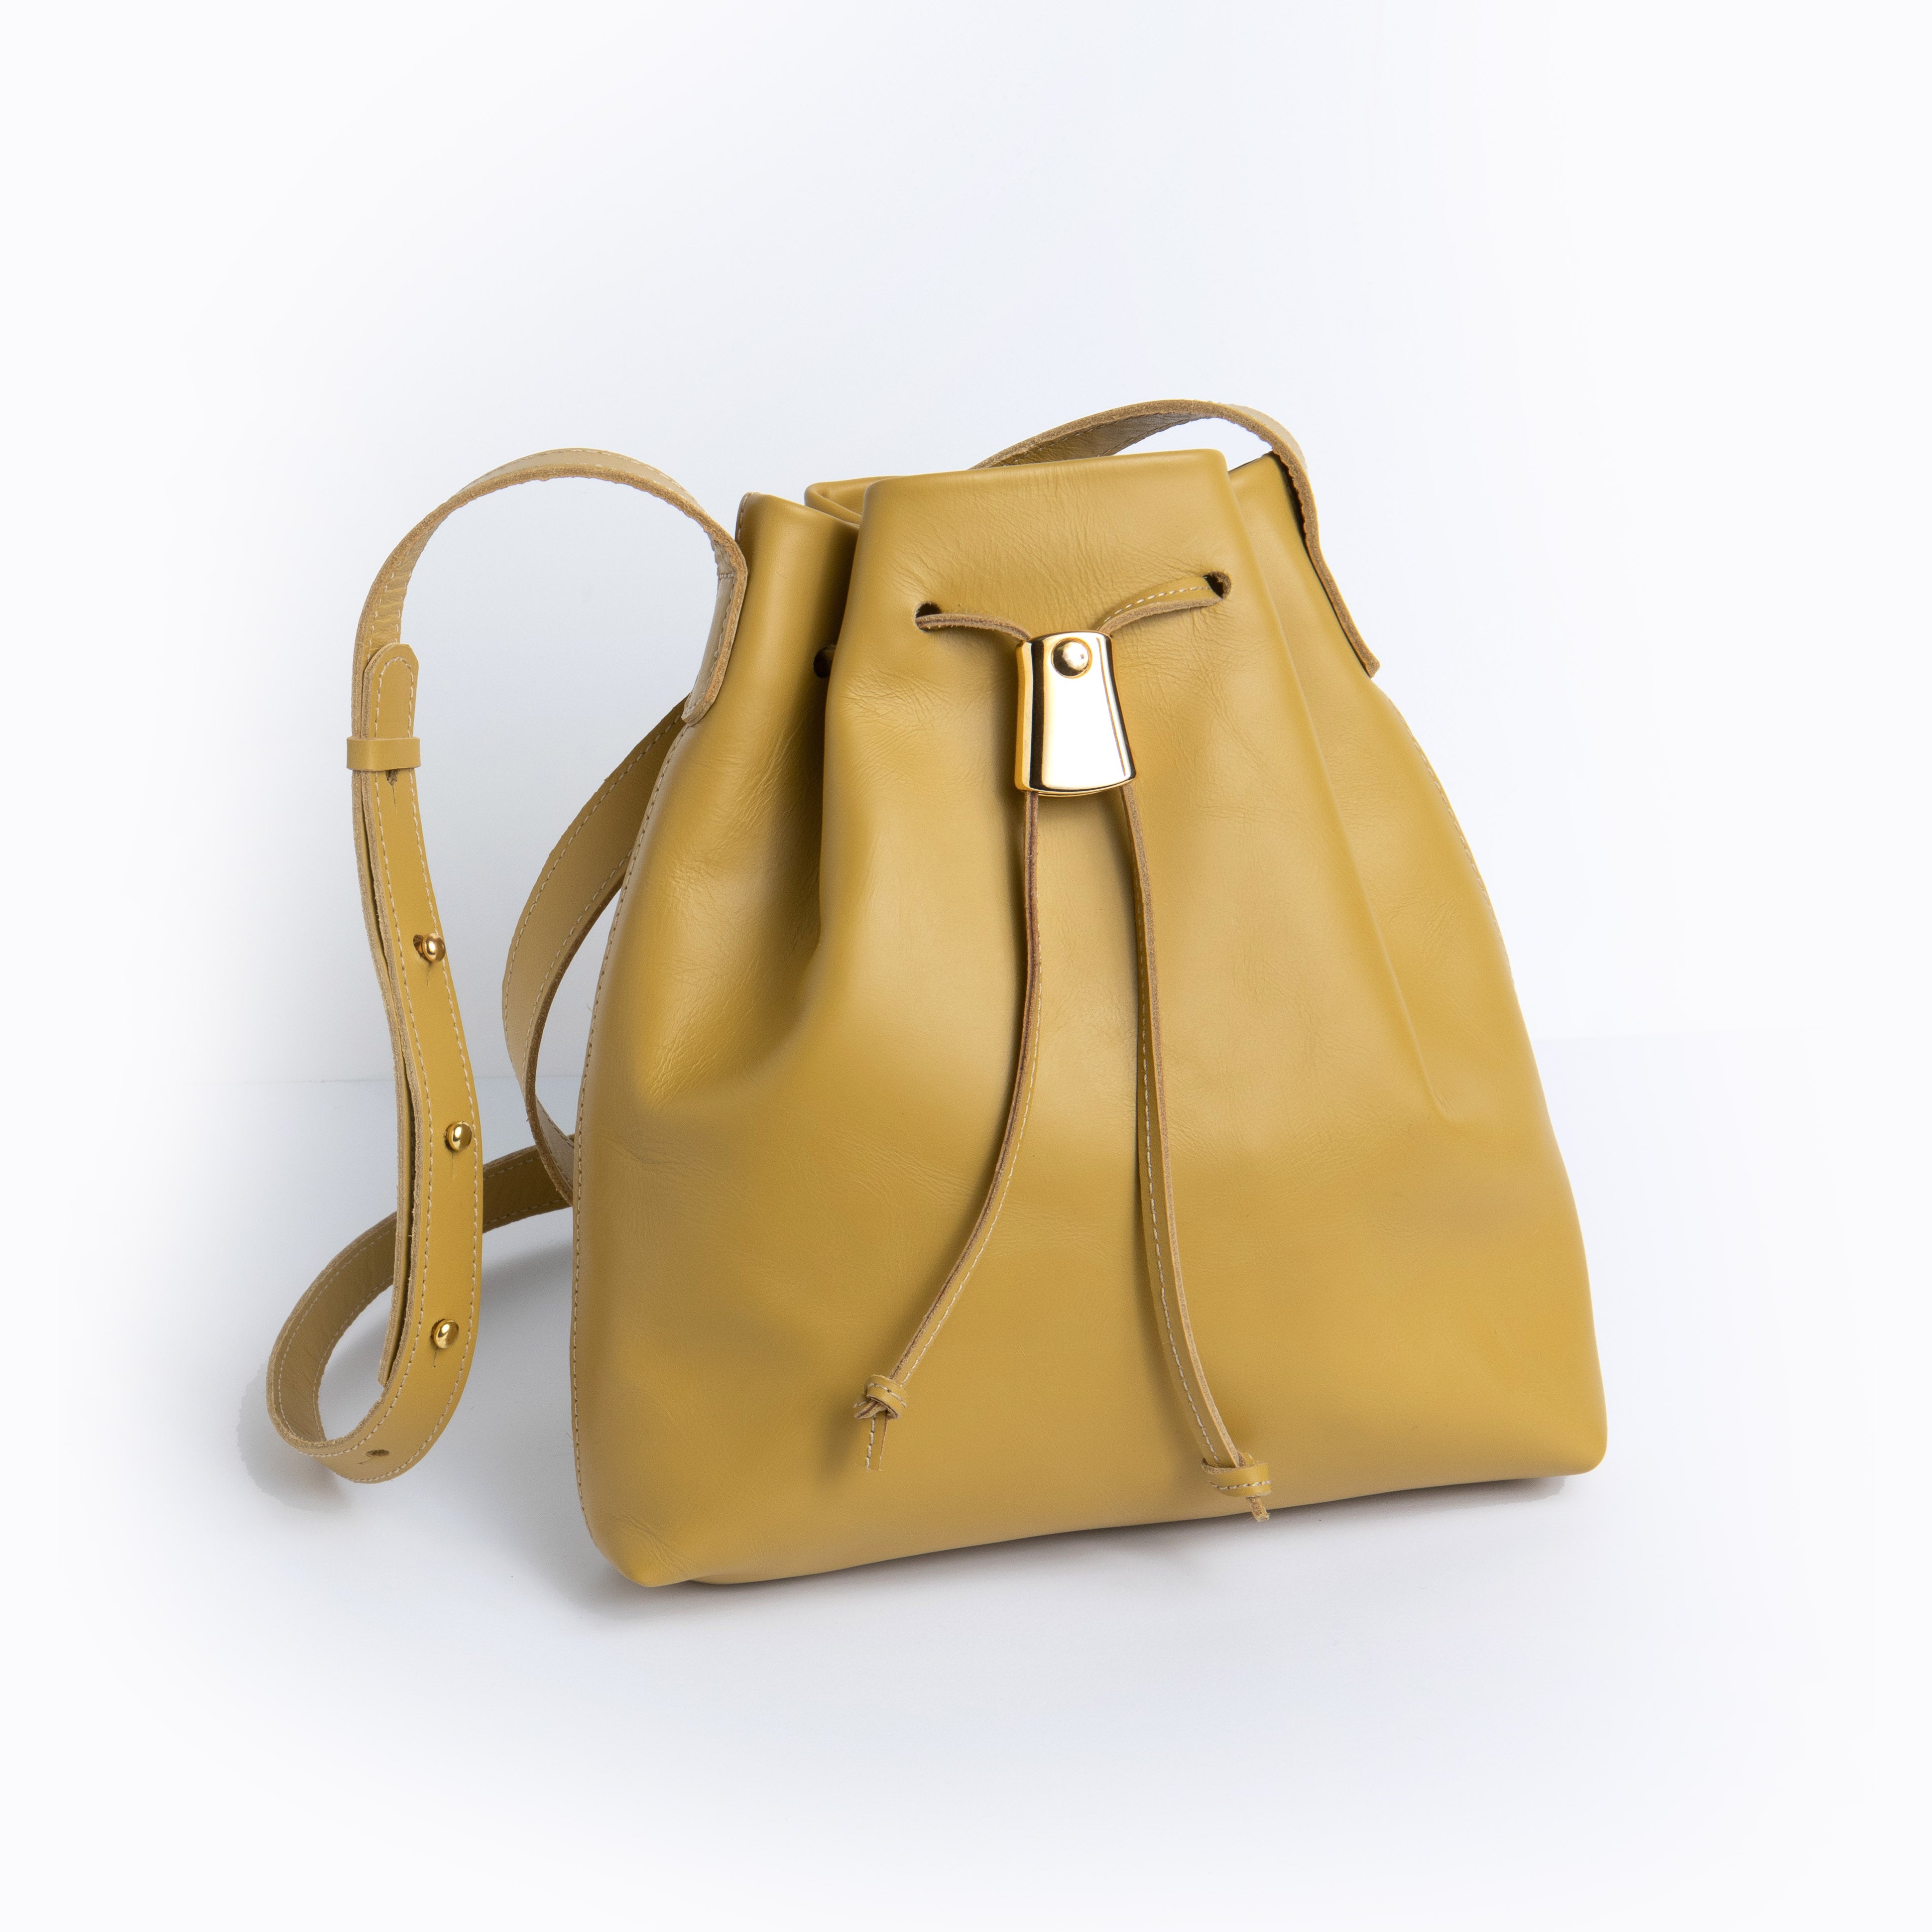  WADORN 2 Colors PU Leather Drawstring for Bucket Bag